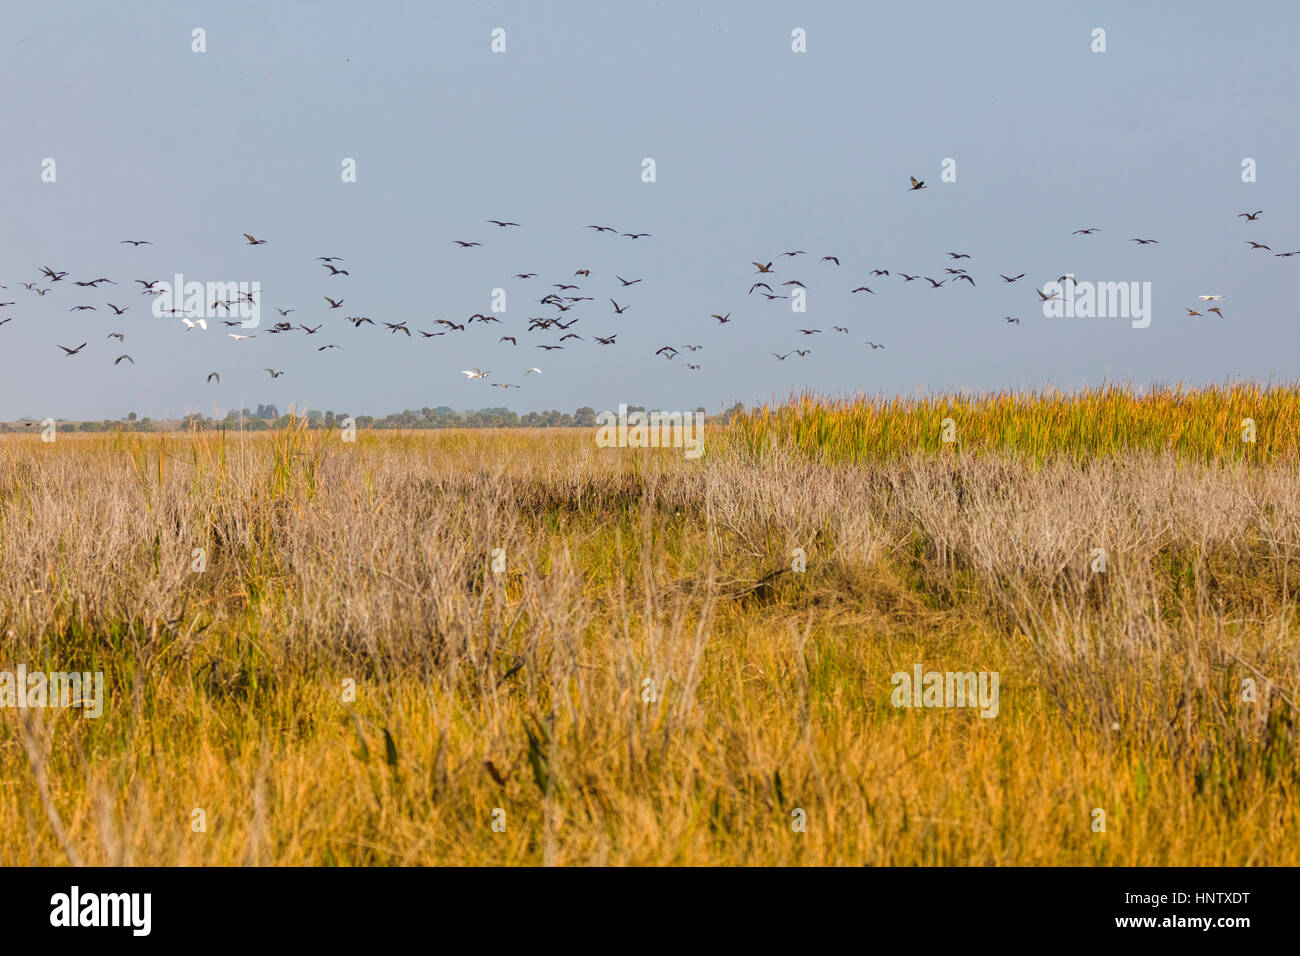 Flock of Glossy Ibis birds flying over marsh lands at Lake Okeechobee in Central Florida Stock Photo